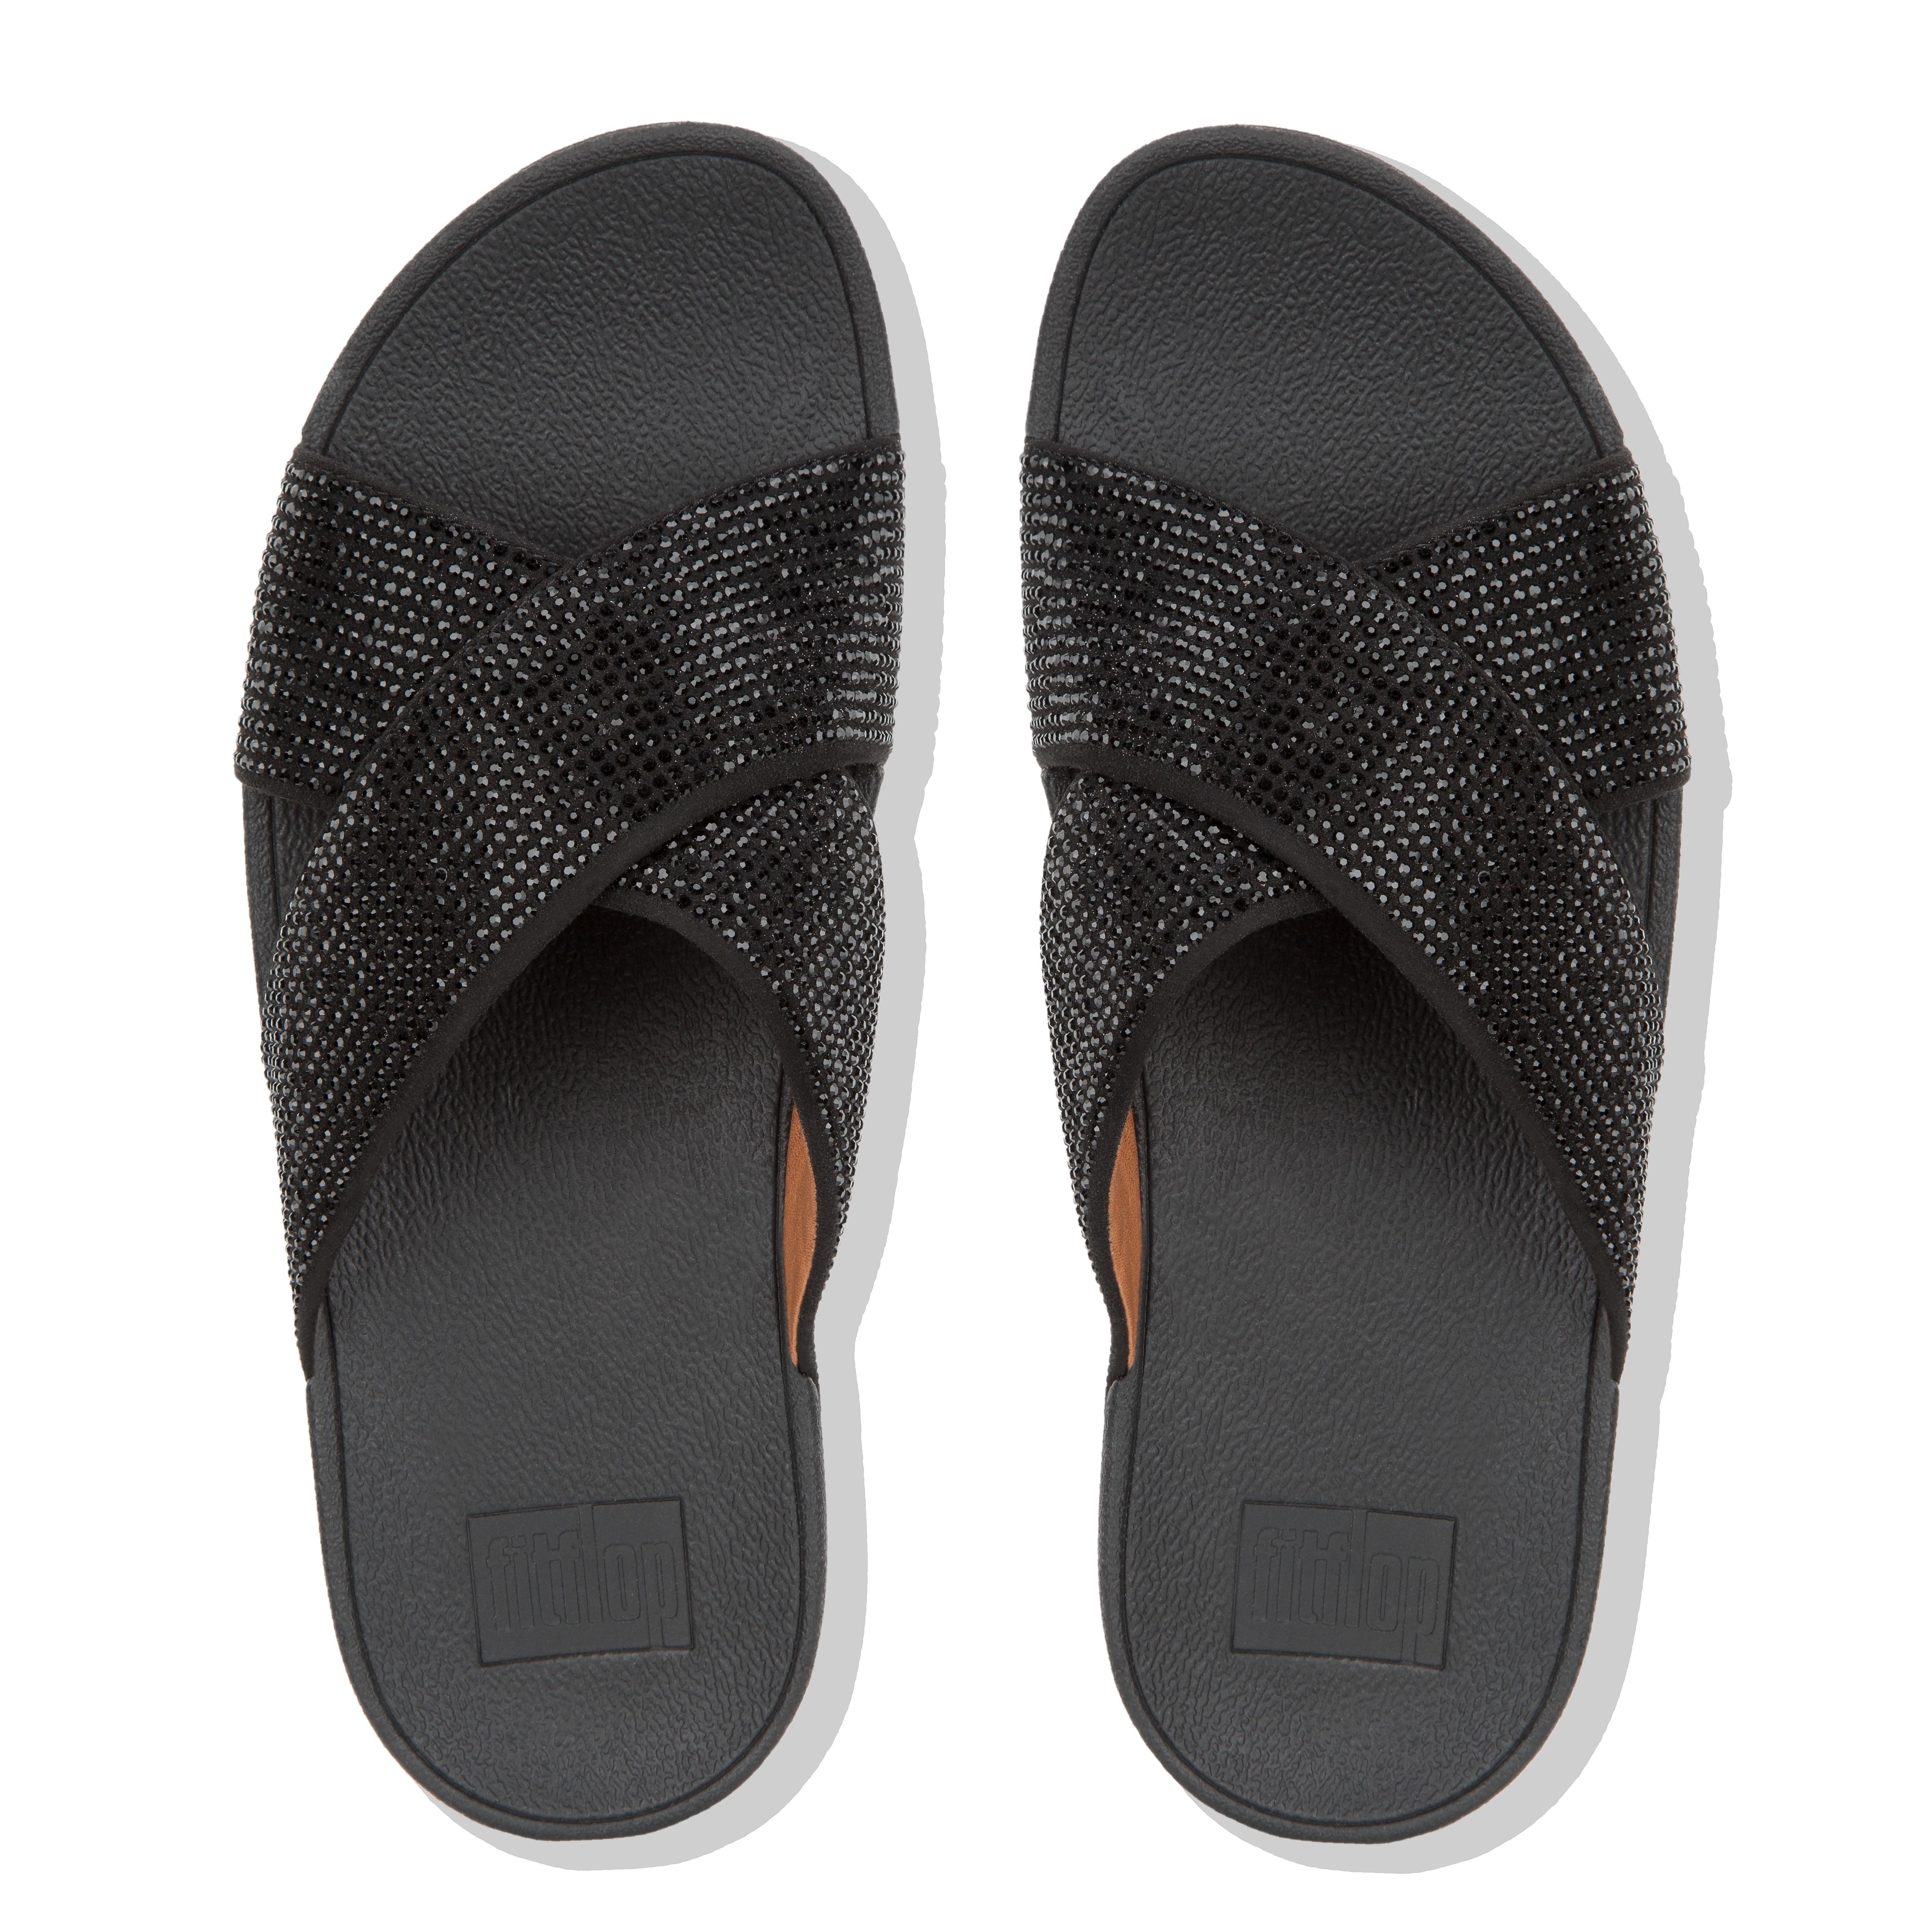 fitflop ritzy slide sandals